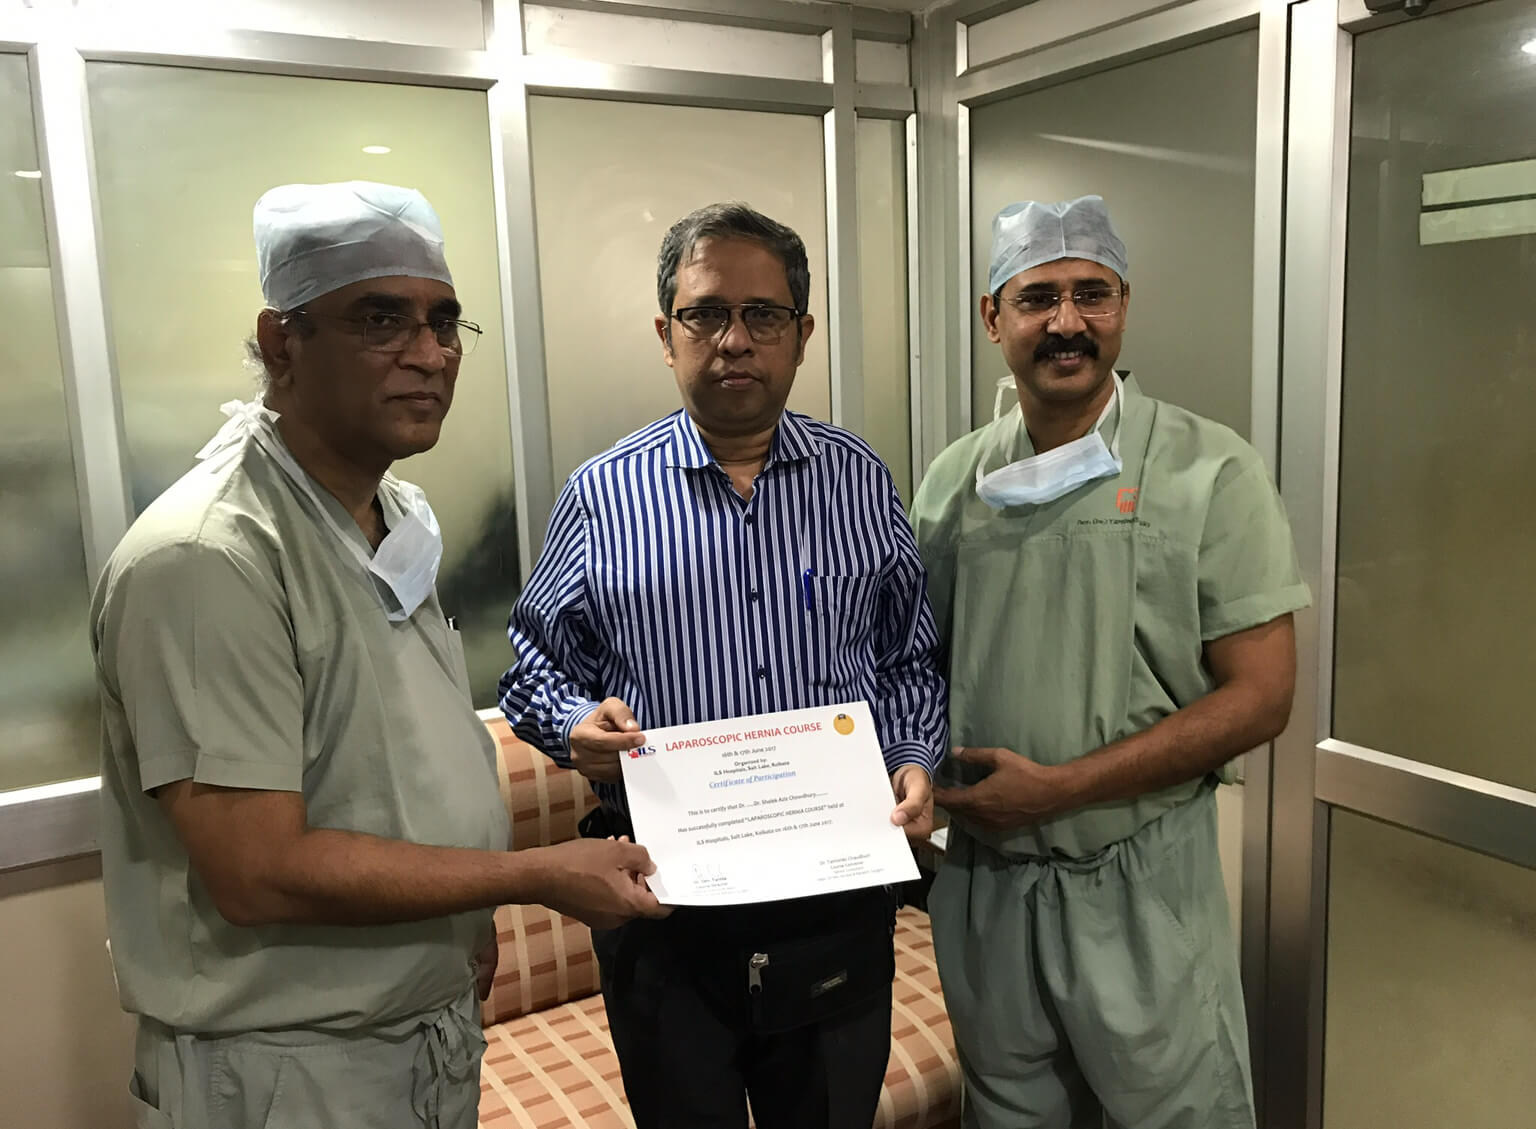 eceiving certificate for attending ‘Laparoscopic Hernia Course’